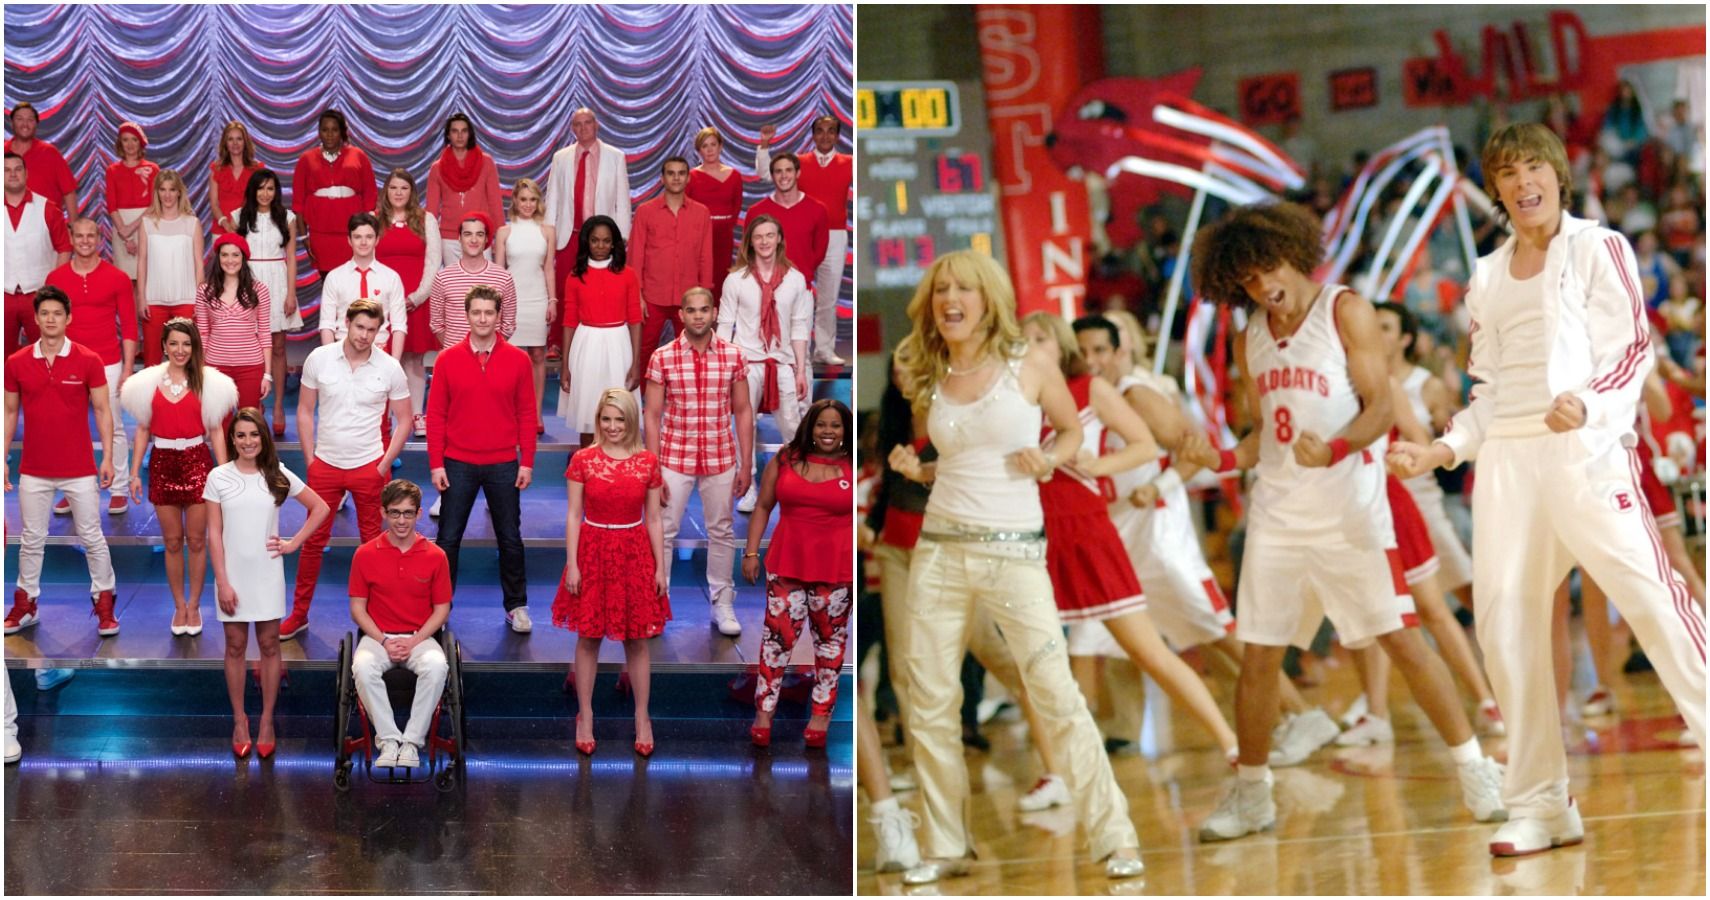 5 Reasons Why Glee Is The Best Musical About High School (& 5 Reasons Why High School Musical Is Better)